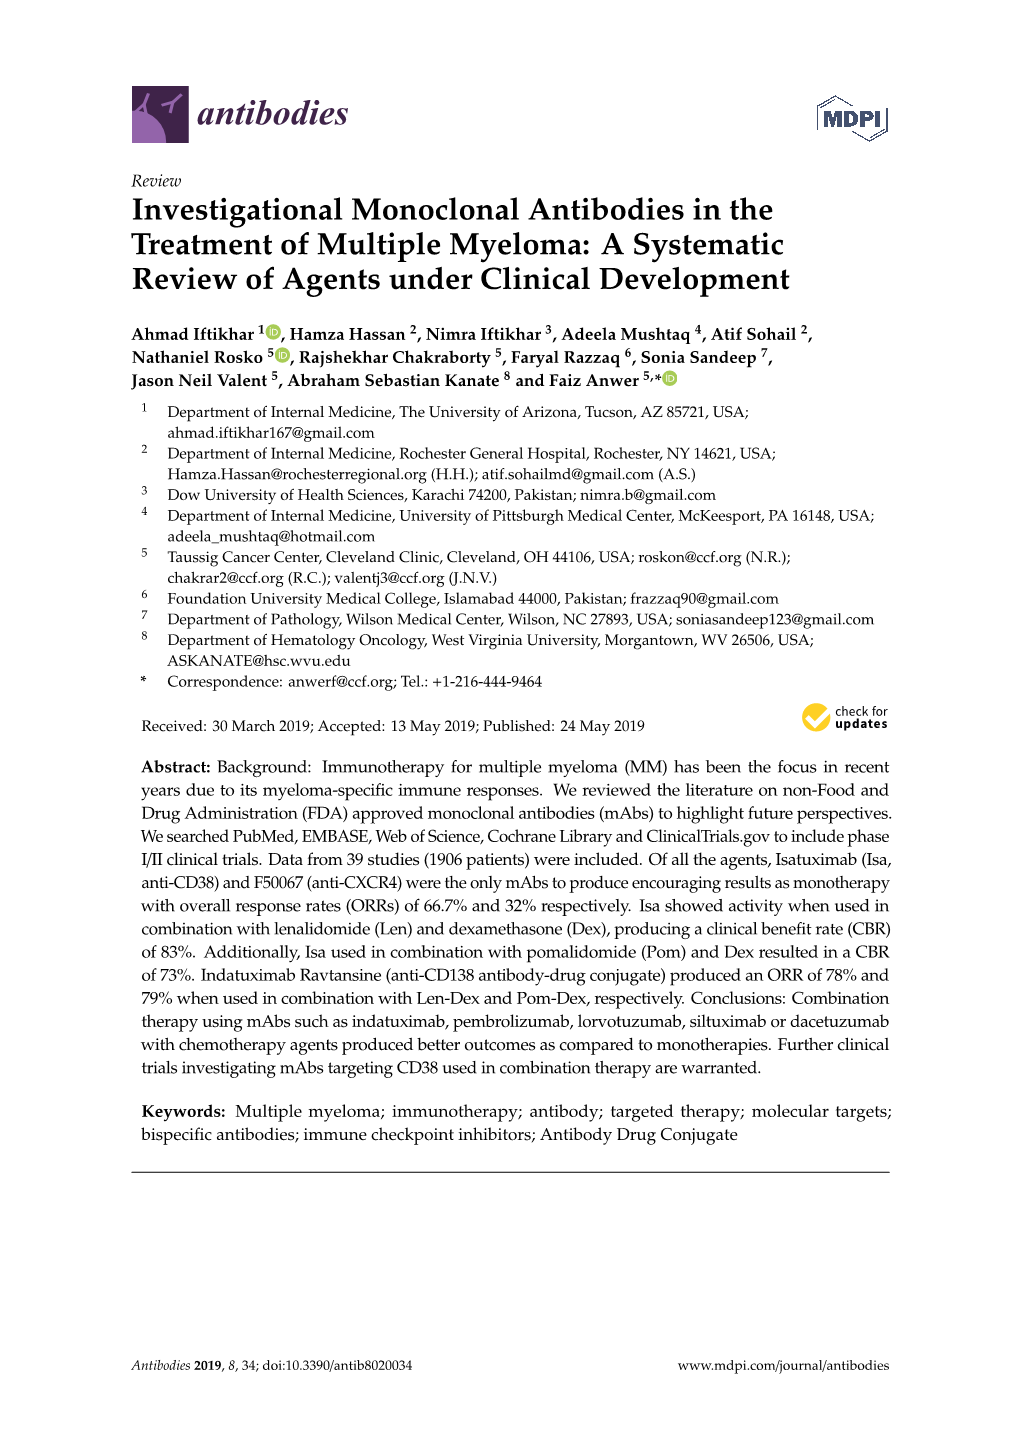 Investigational Monoclonal Antibodies in the Treatment of Multiple Myeloma: a Systematic Review of Agents Under Clinical Development